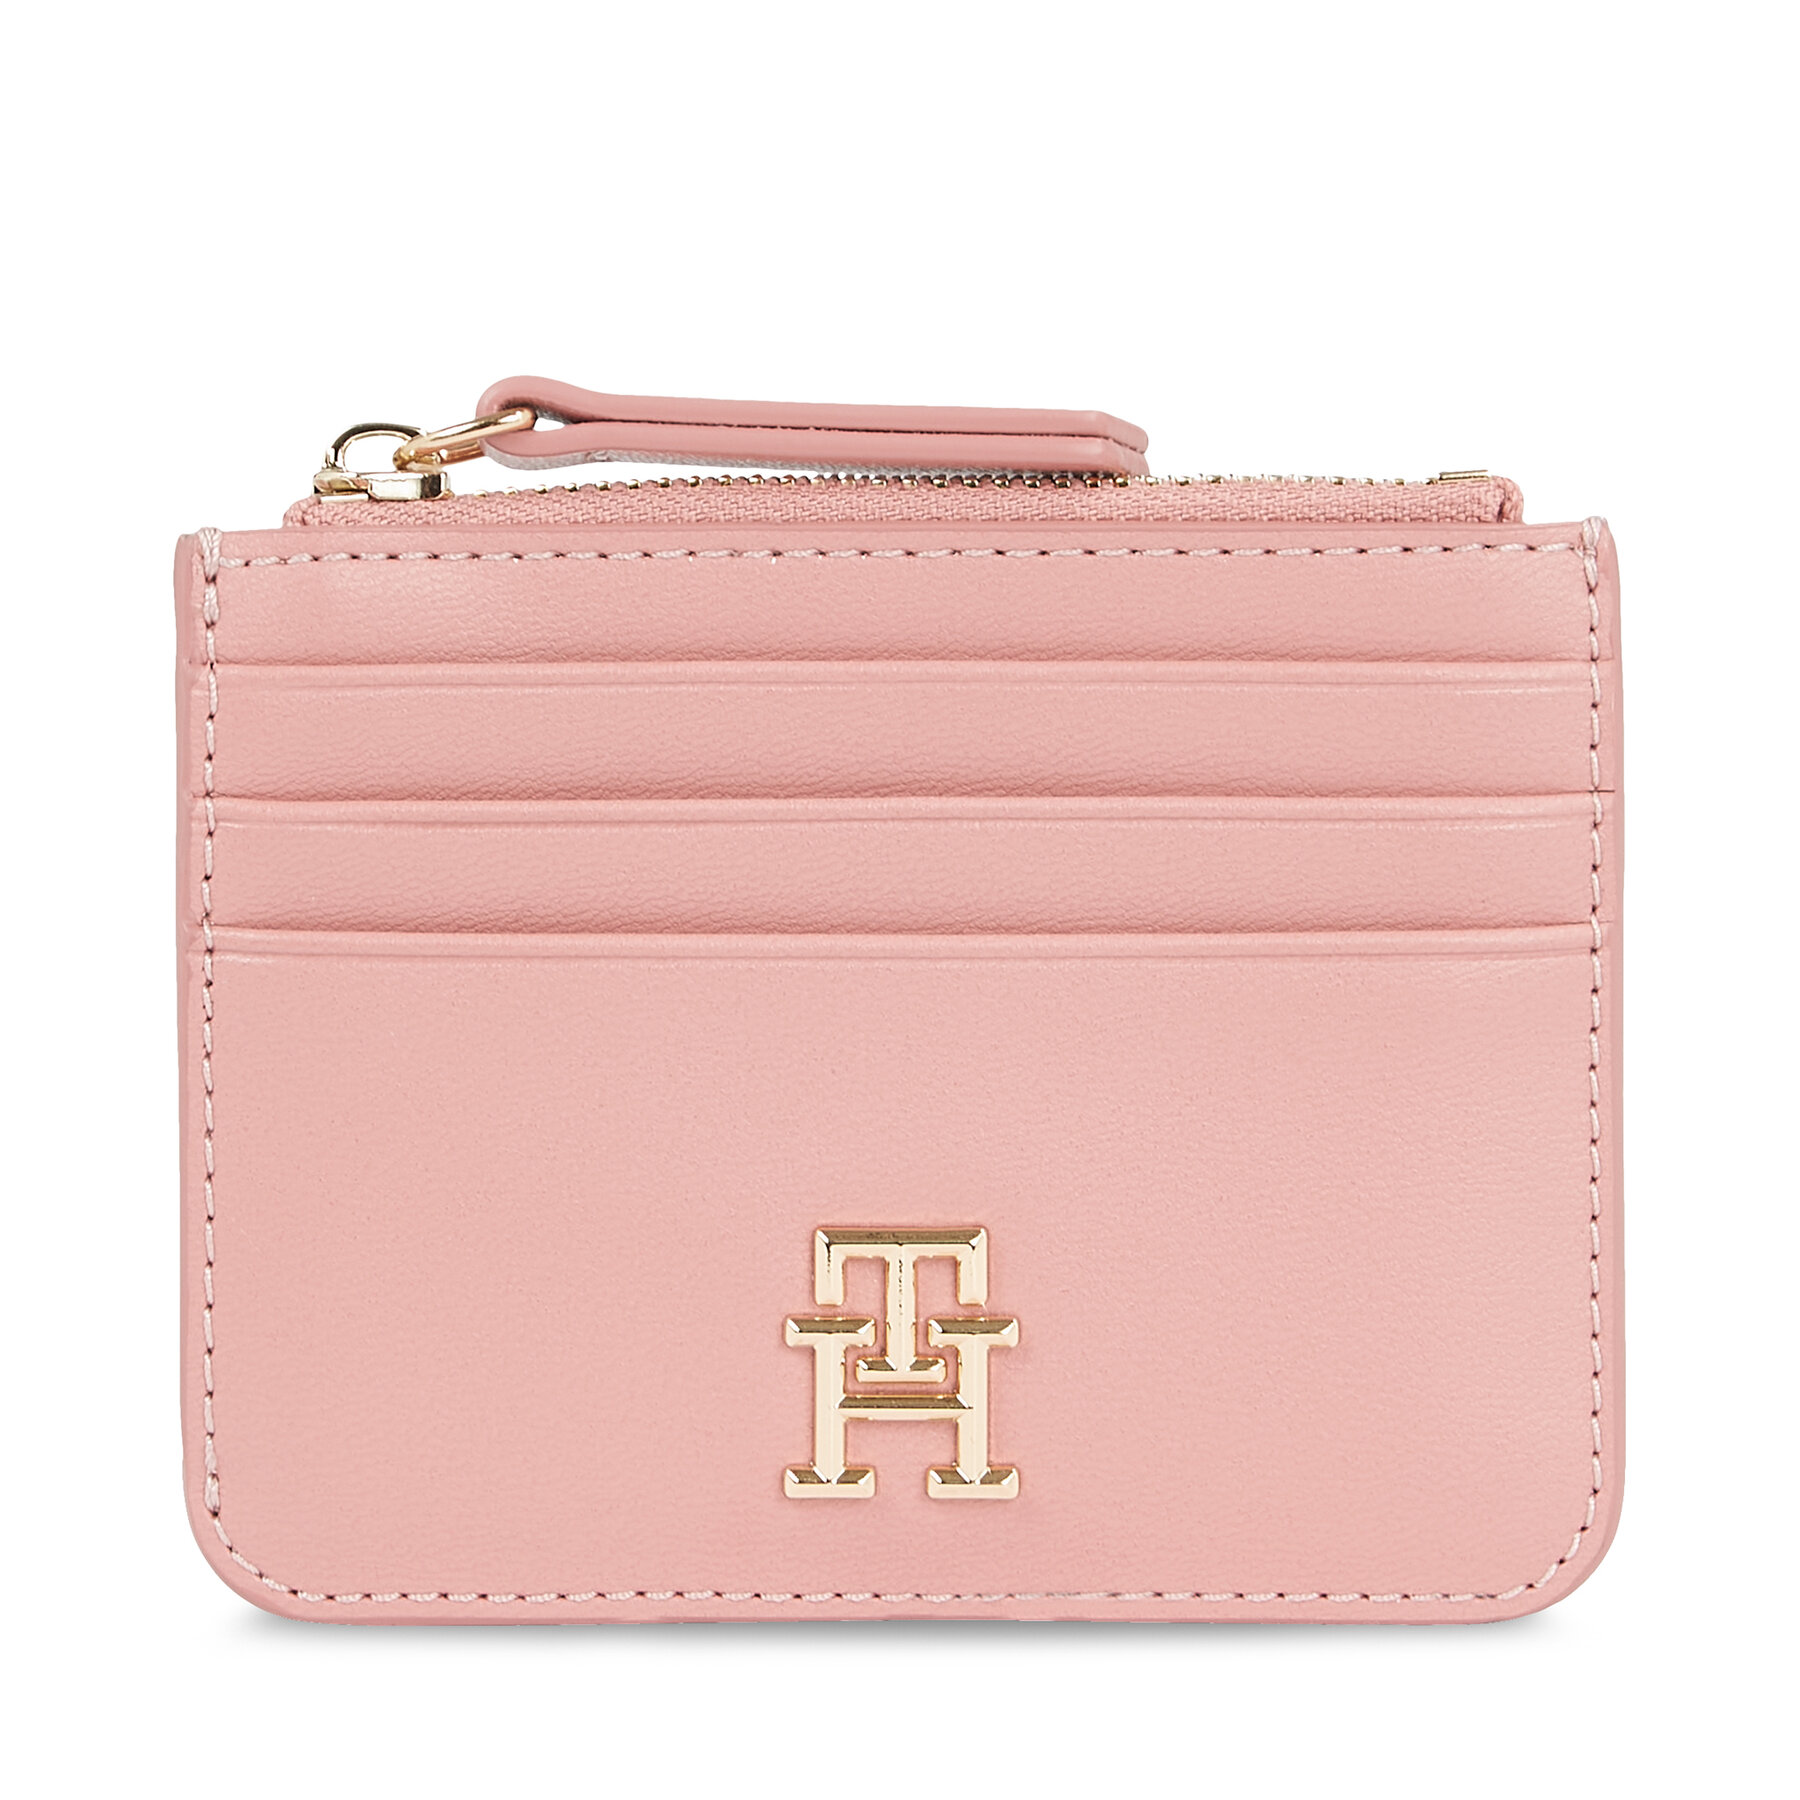 Korthållare Tommy Hilfiger Th Refined Cc Holder AW0AW16016 Teaberry Blossom TJ5